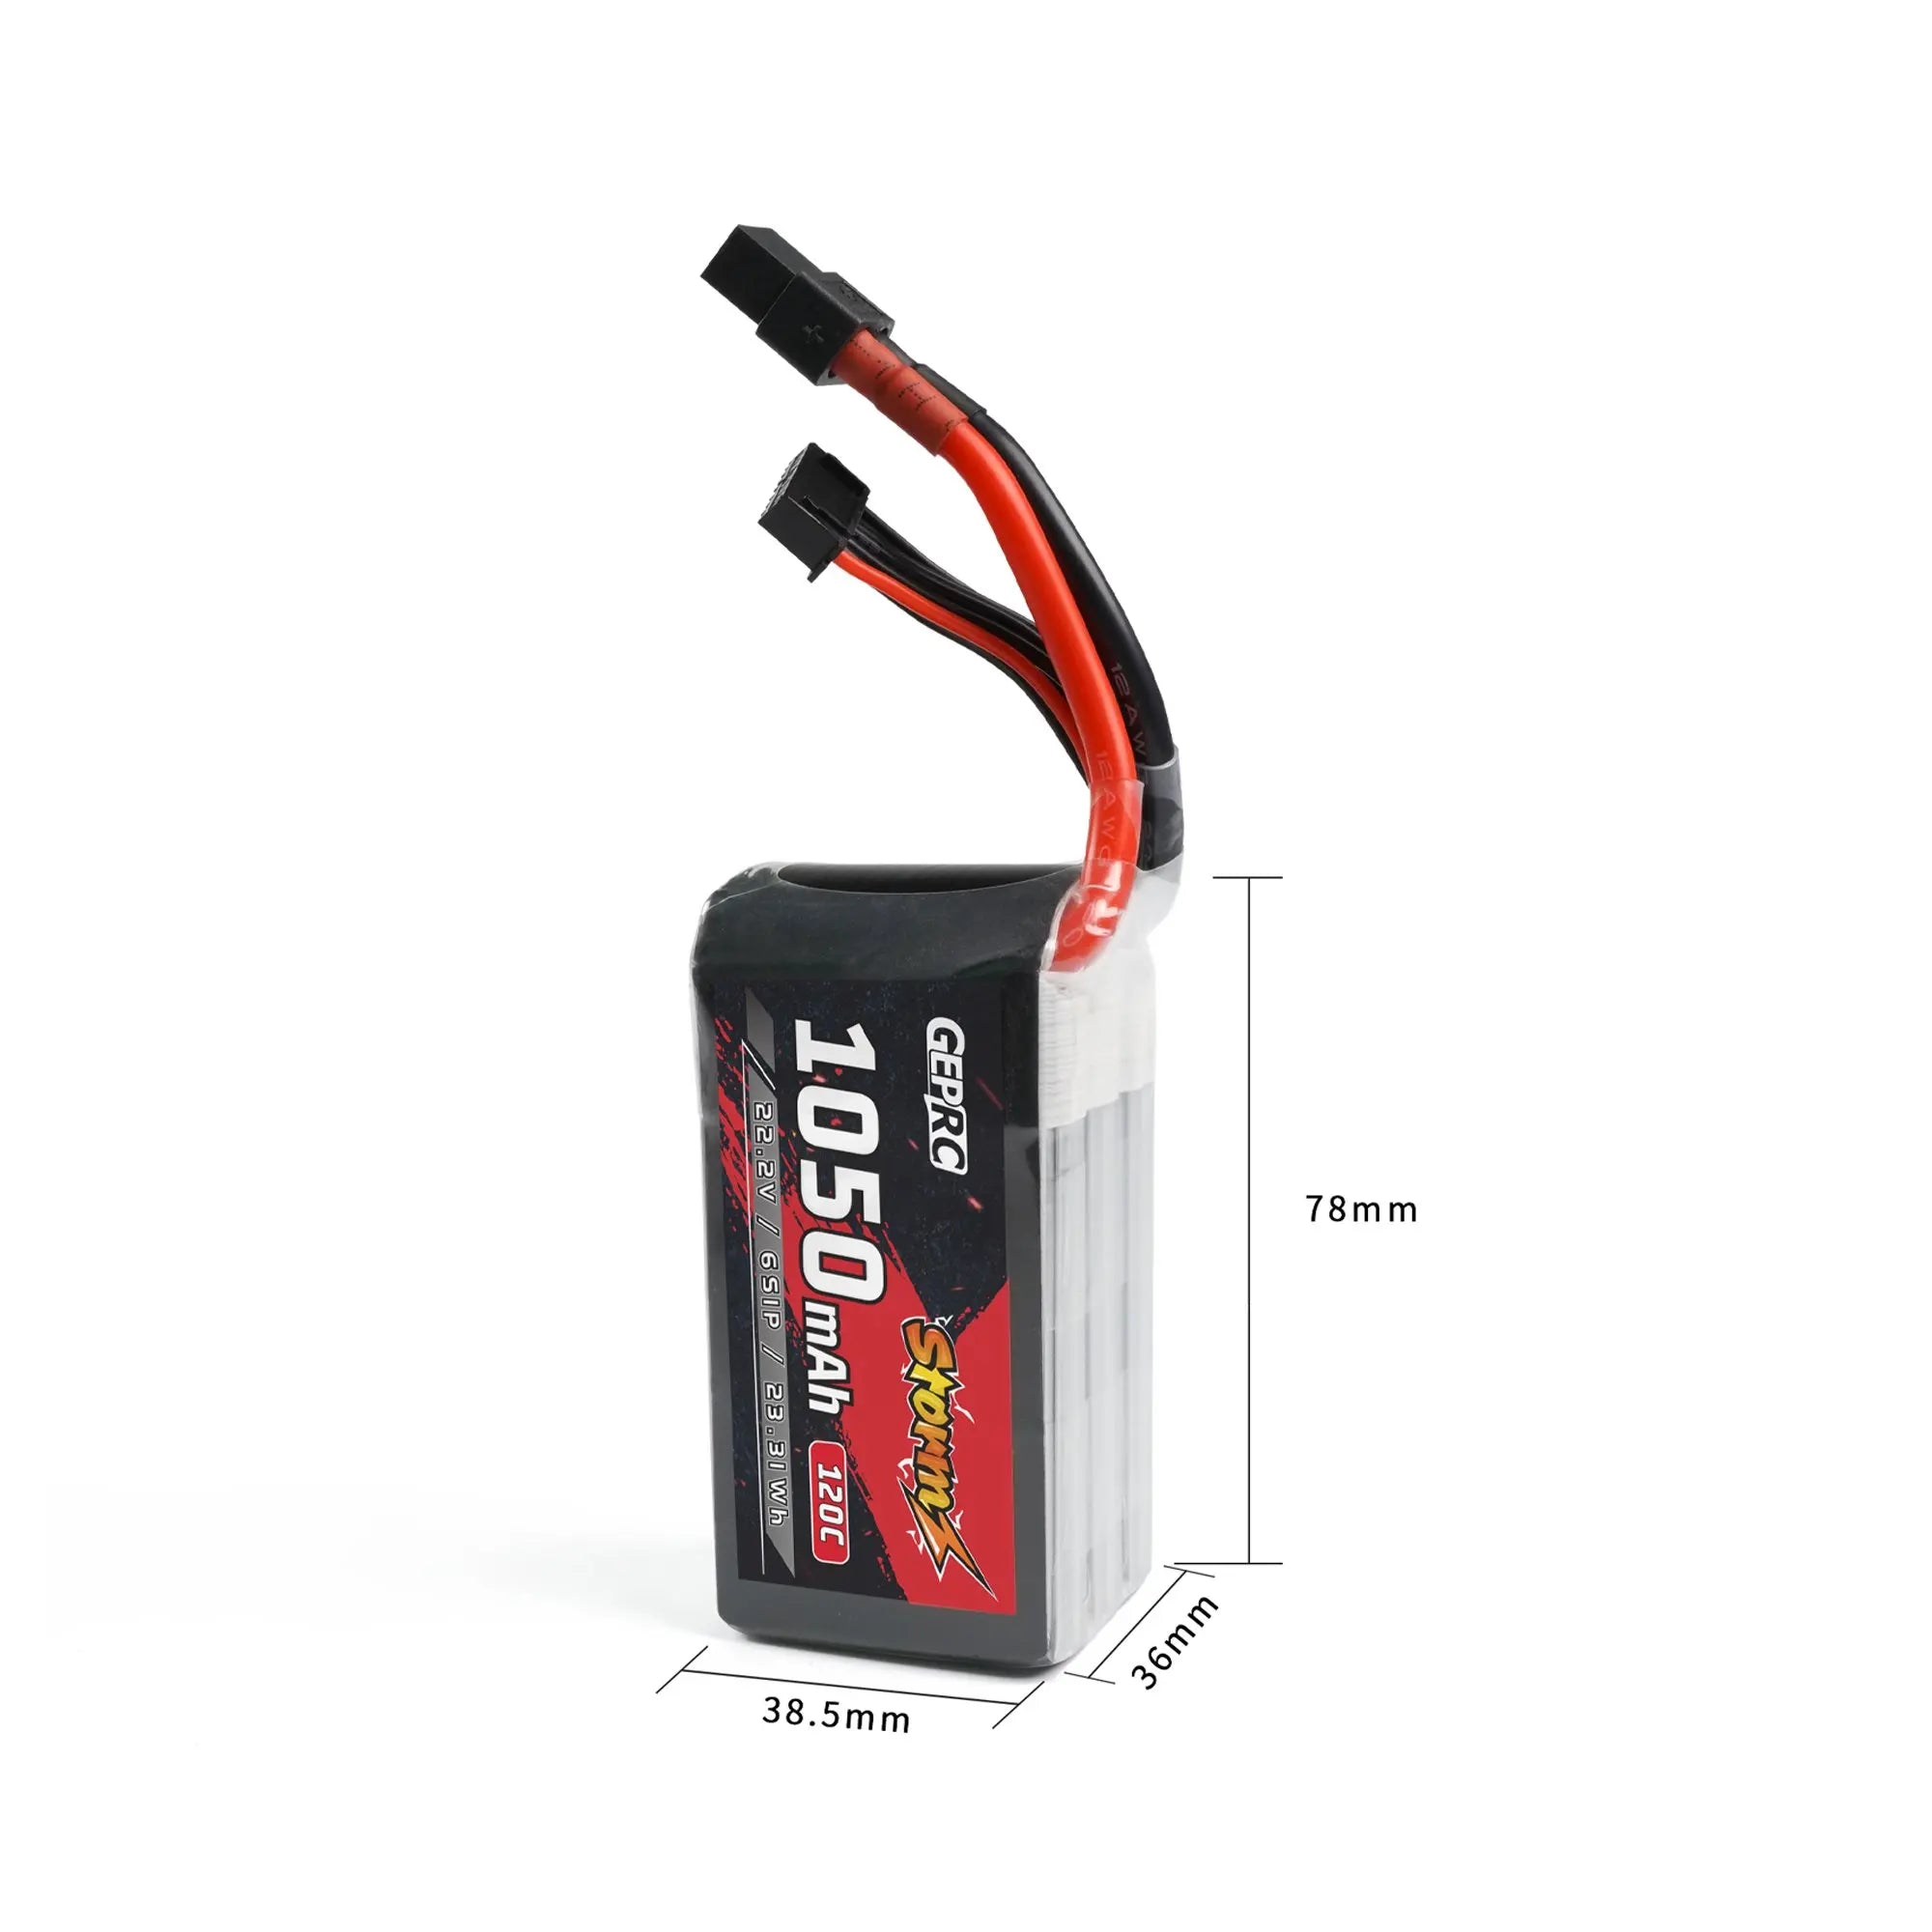 GEPRC Storm 6S 1050mAh 120C Lipo FPV Battery, A: It is recommended to use the HOTA D6 PRO charger, ISDT 608